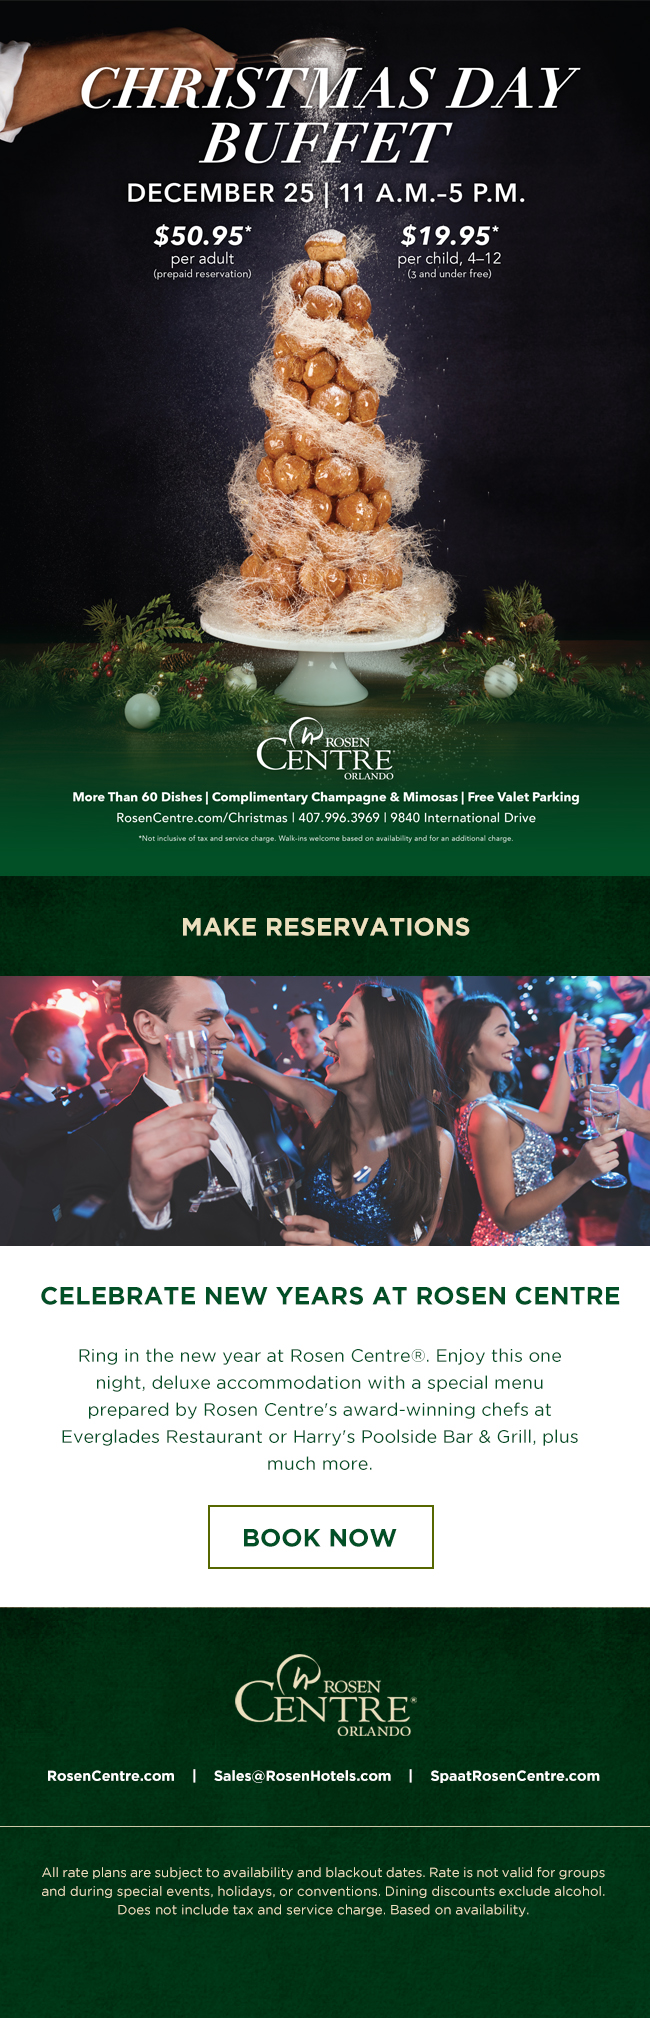 Christmas Day Buffet
		  
DECEMBER 25 | 11 A.M.–5 P.M.
		  
$50.95*
per adult
(prepaid reservation)
		  
$19.95*
per child, 4–12
(3 and under free)
		  
More Than 60 Dishes | Complimentary Champagne & Mimosas | Free Valet Parking
RosenCentre.com/Christmas | 407.996.3969 | 9840 International Drive
*Not inclusive of tax and service charge. Walk-ins welcome based on availability and for an additional charge.
		  
Celebrate New Years at Rosen Centre
		  
Ring in the new year at Rosen Centre®. Enjoy this one night, deluxe accommodation with a special menu prepared by Rosen Centre's award-winning chefs at Everglades Restaurant or Harry's Poolside Bar & Grill, plus much more.
		  
All rate plans are subject to availability and blackout dates. Rate is not valid for groups and during special events, holidays, or conventions. Dining discounts exclude alcohol. Does not include tax and service charge. Based on availability. 